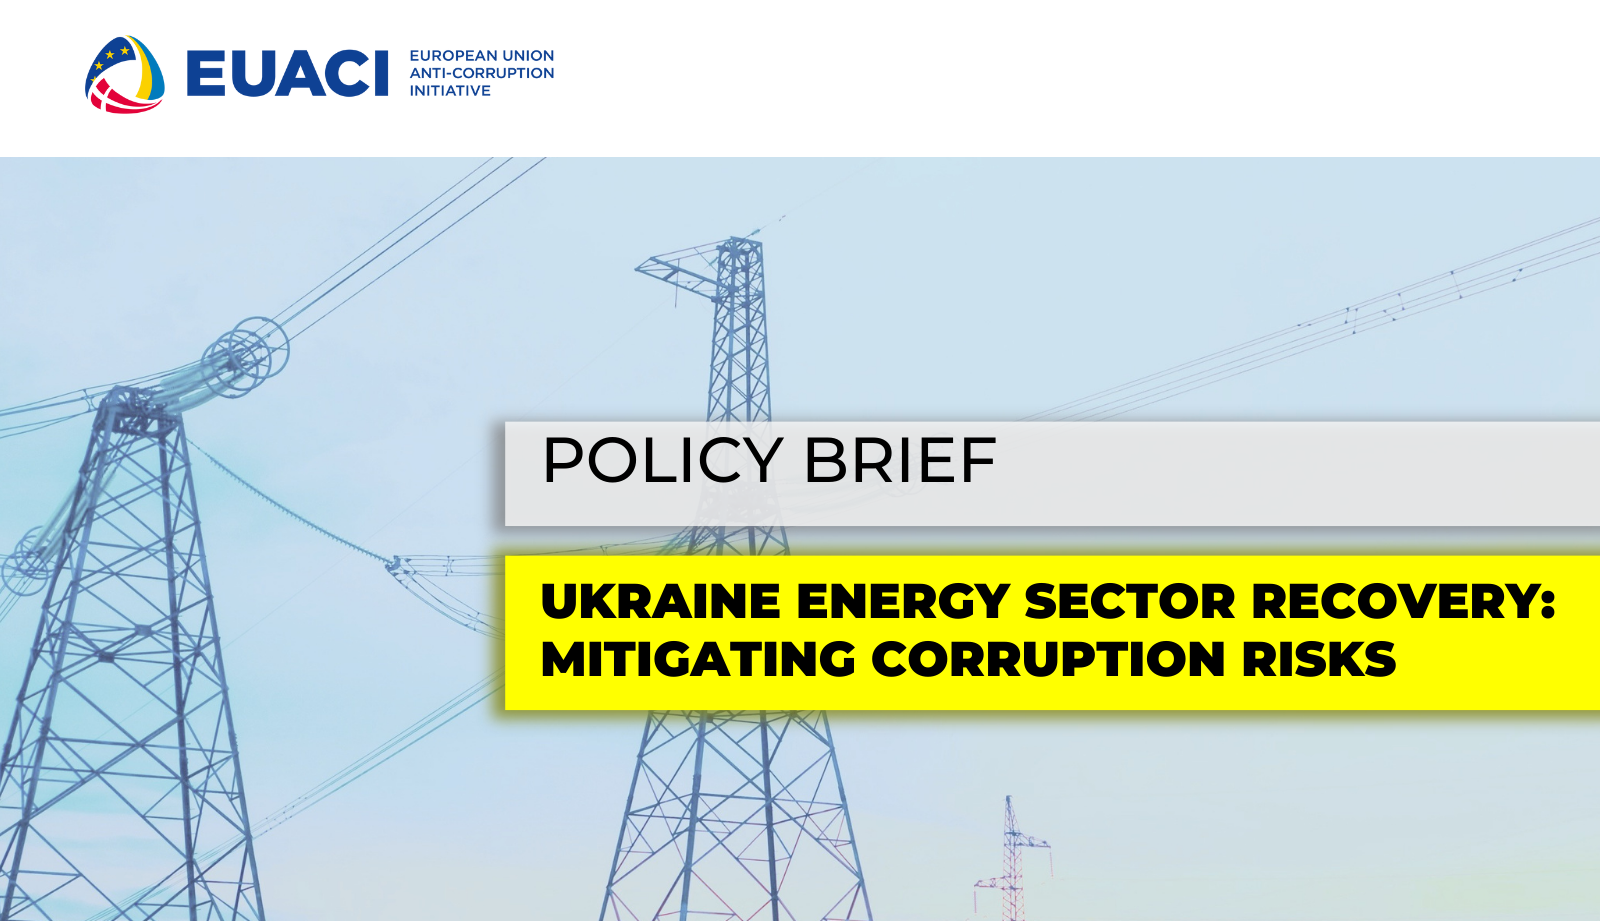 POLICY BRIEF “Ukraine energy sector recovery: mitigating corruption risks”